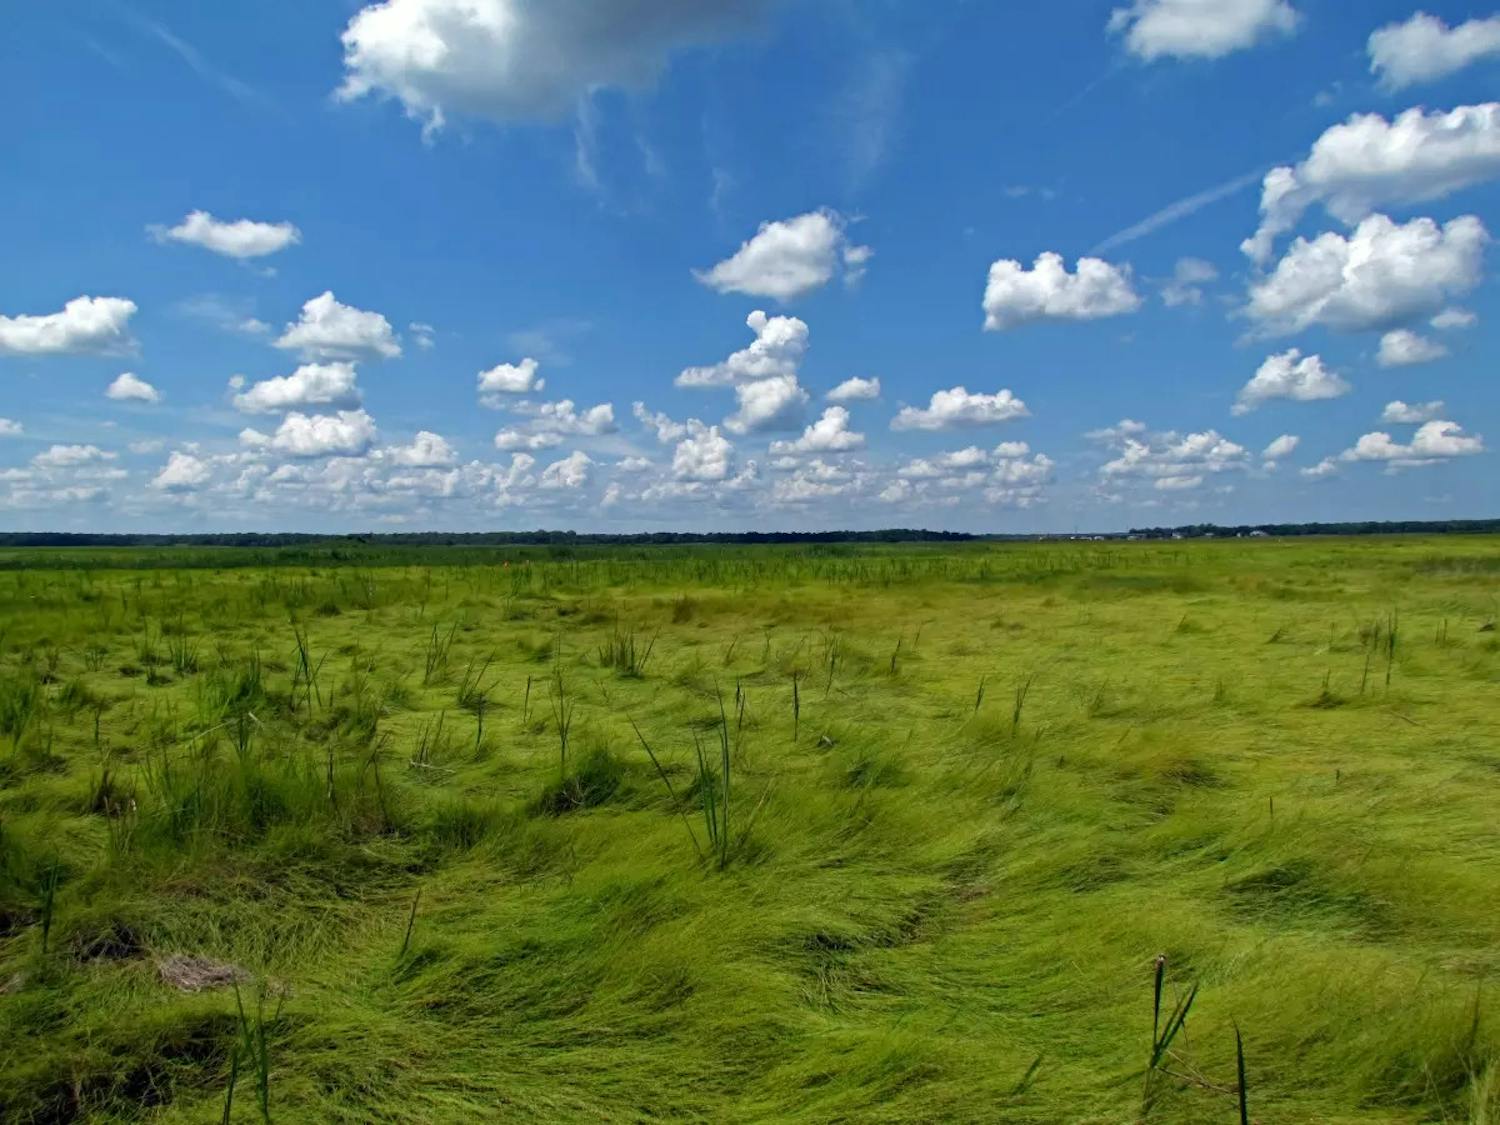 A grassy coastal marsh at the Edwin B. Forsythe National Wildlife Refuge in Ocean County (Photo courtesy of U.S. Fish and Wildlife Service / &quot;Wilderness area Edwin B. Forsythe National Wildlife Refuge.&quot;)